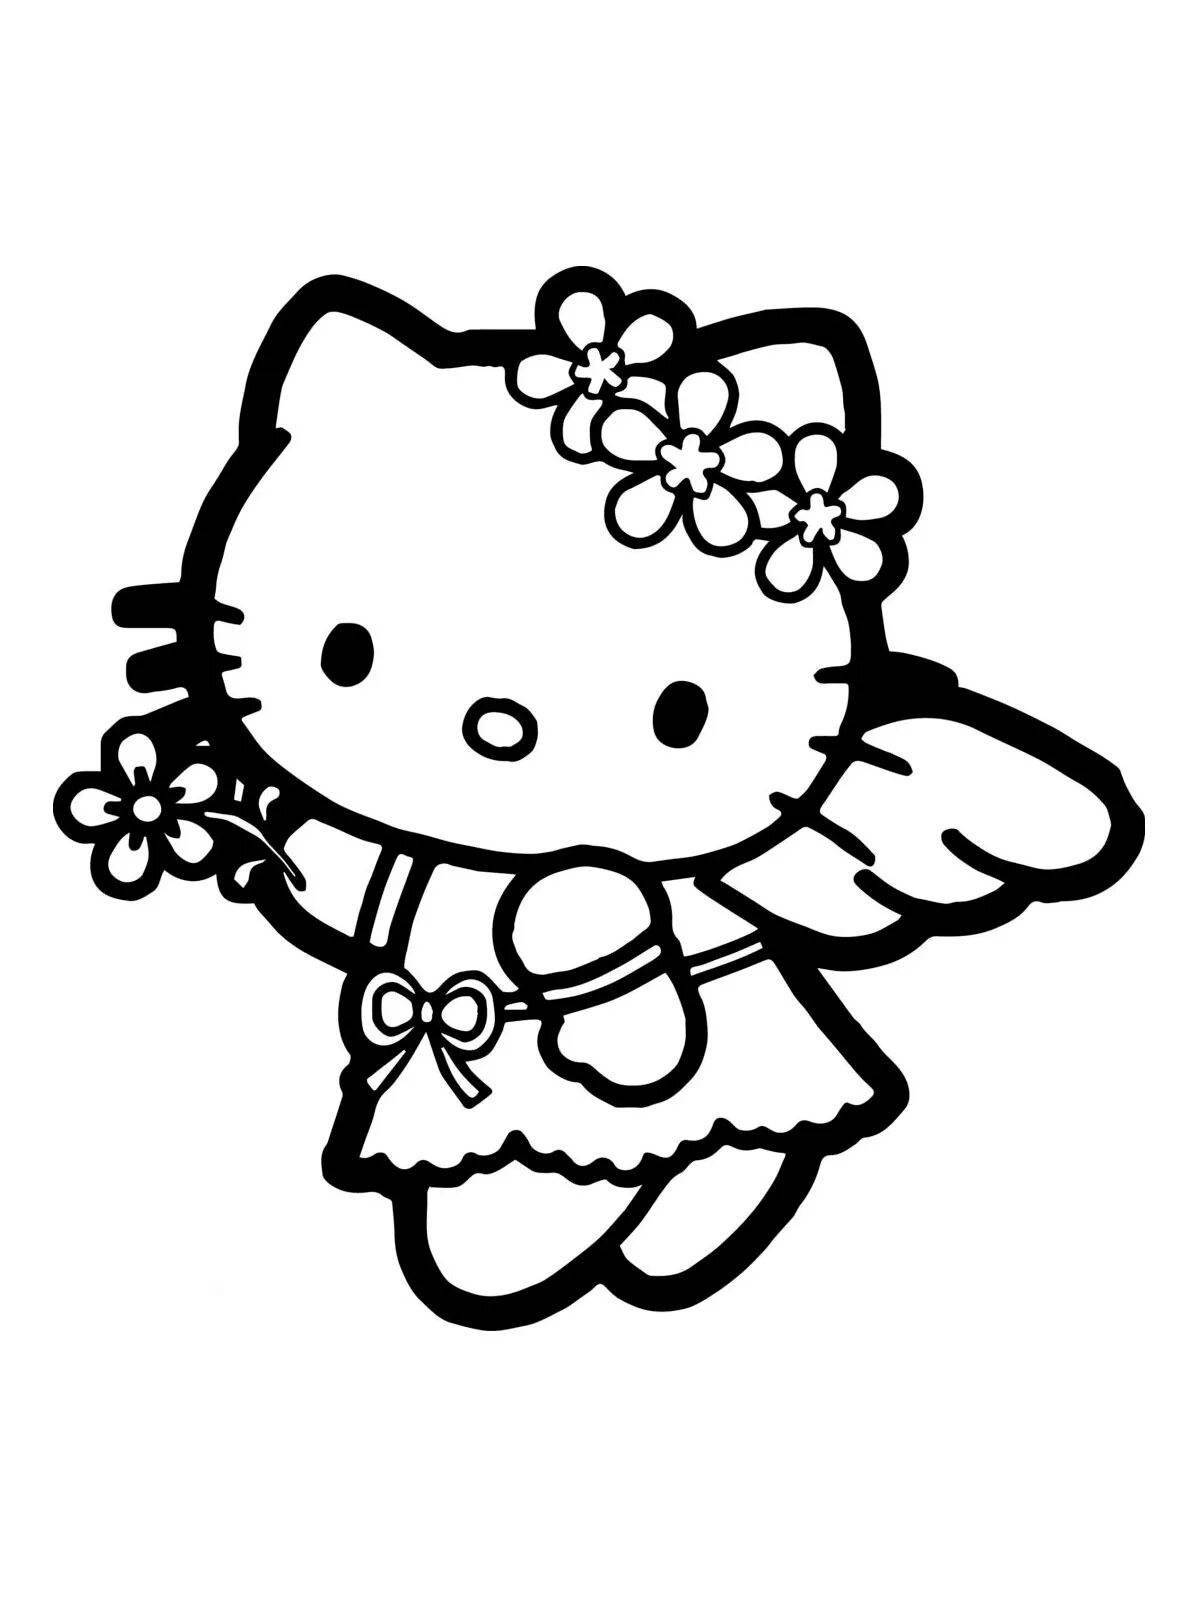 Milady from hello kitty #8